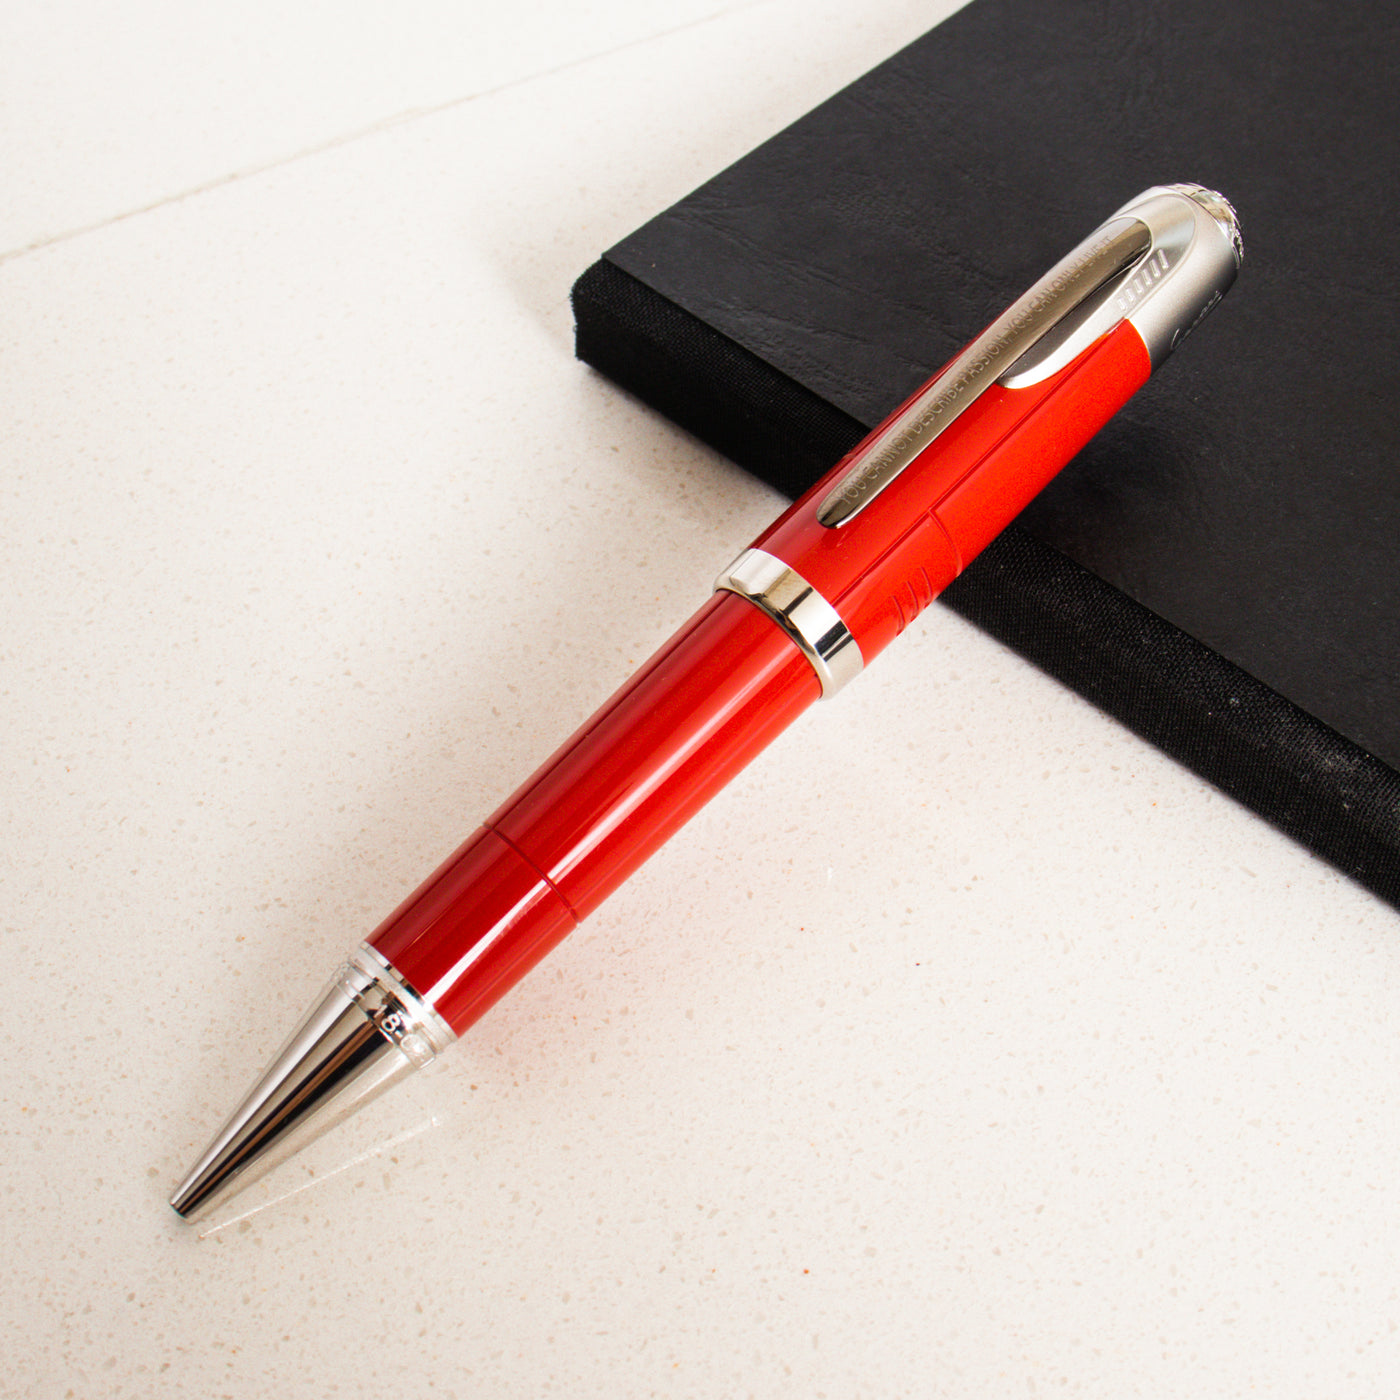 Montblanc Great Characters Enzo Ferrari Special Edition Ballpoint Pen